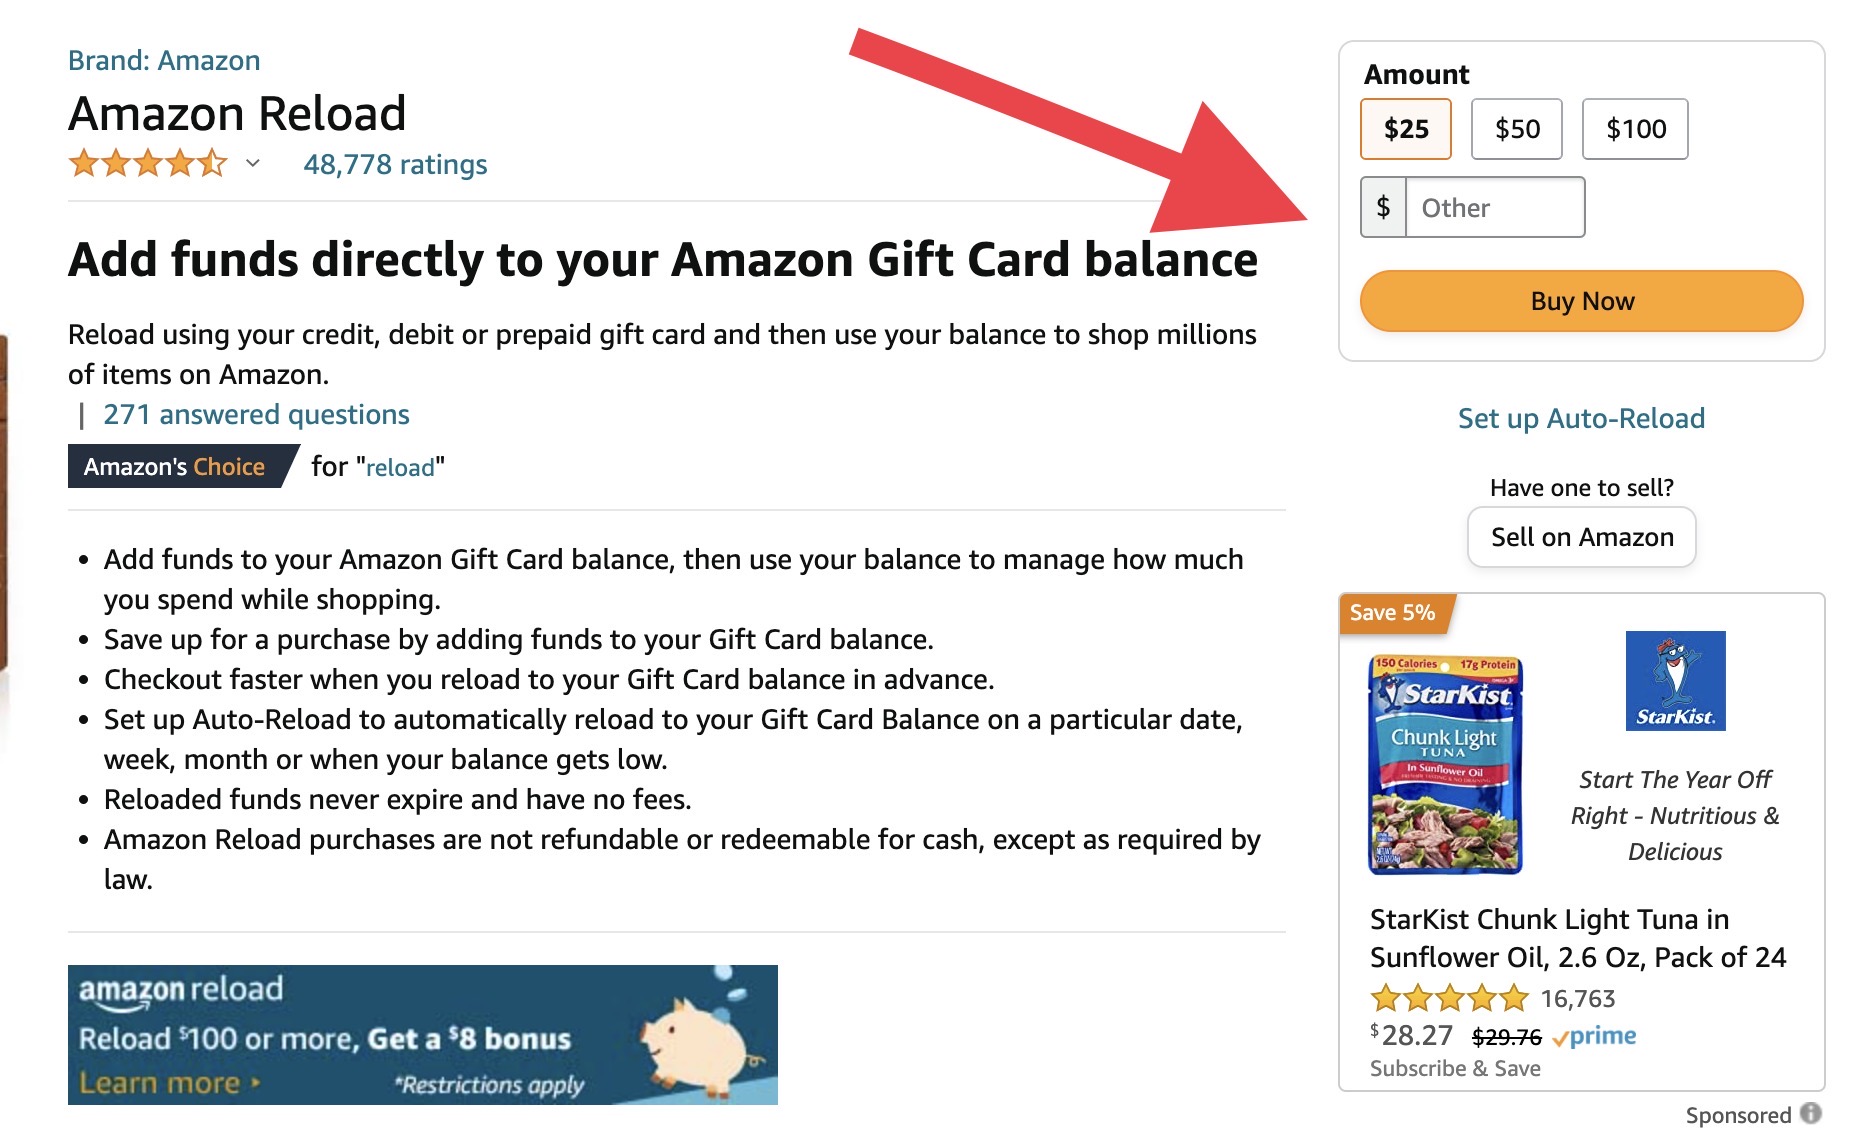 Can Amazon Use Gift Cards to Buy Gift Cards?